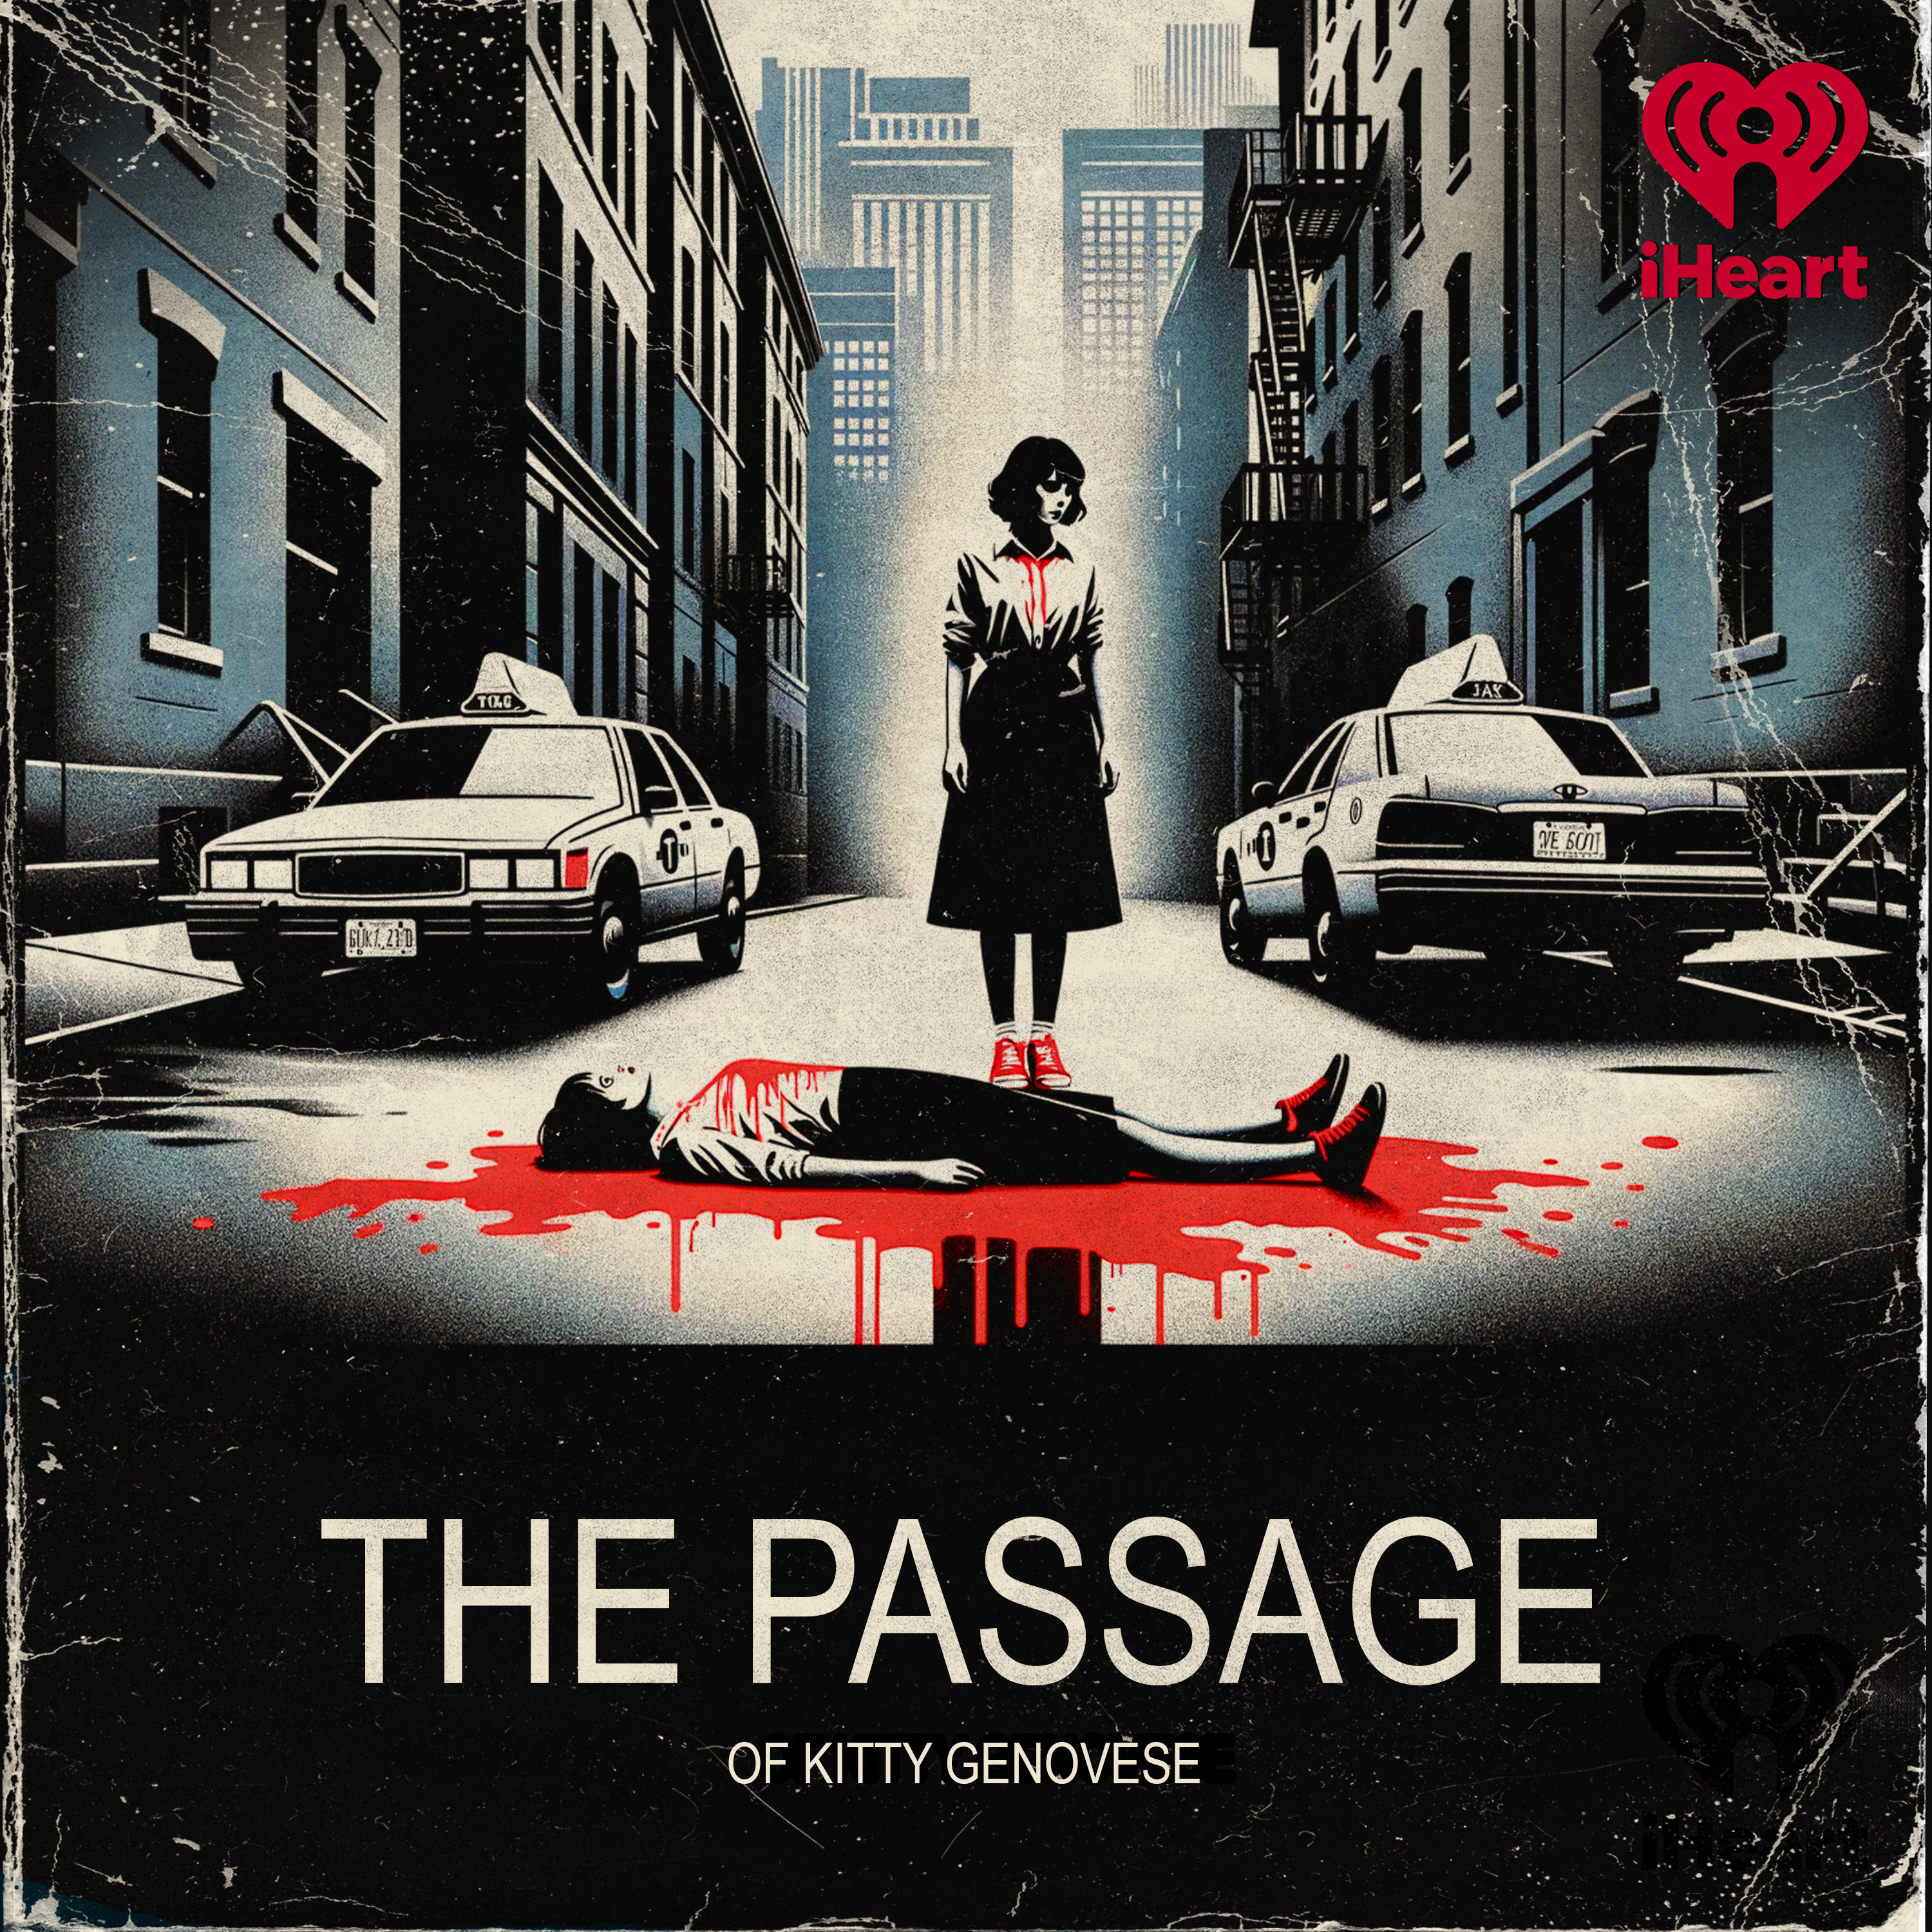 Episode 9: THE PASSAGE OF KITTY GENOVESE